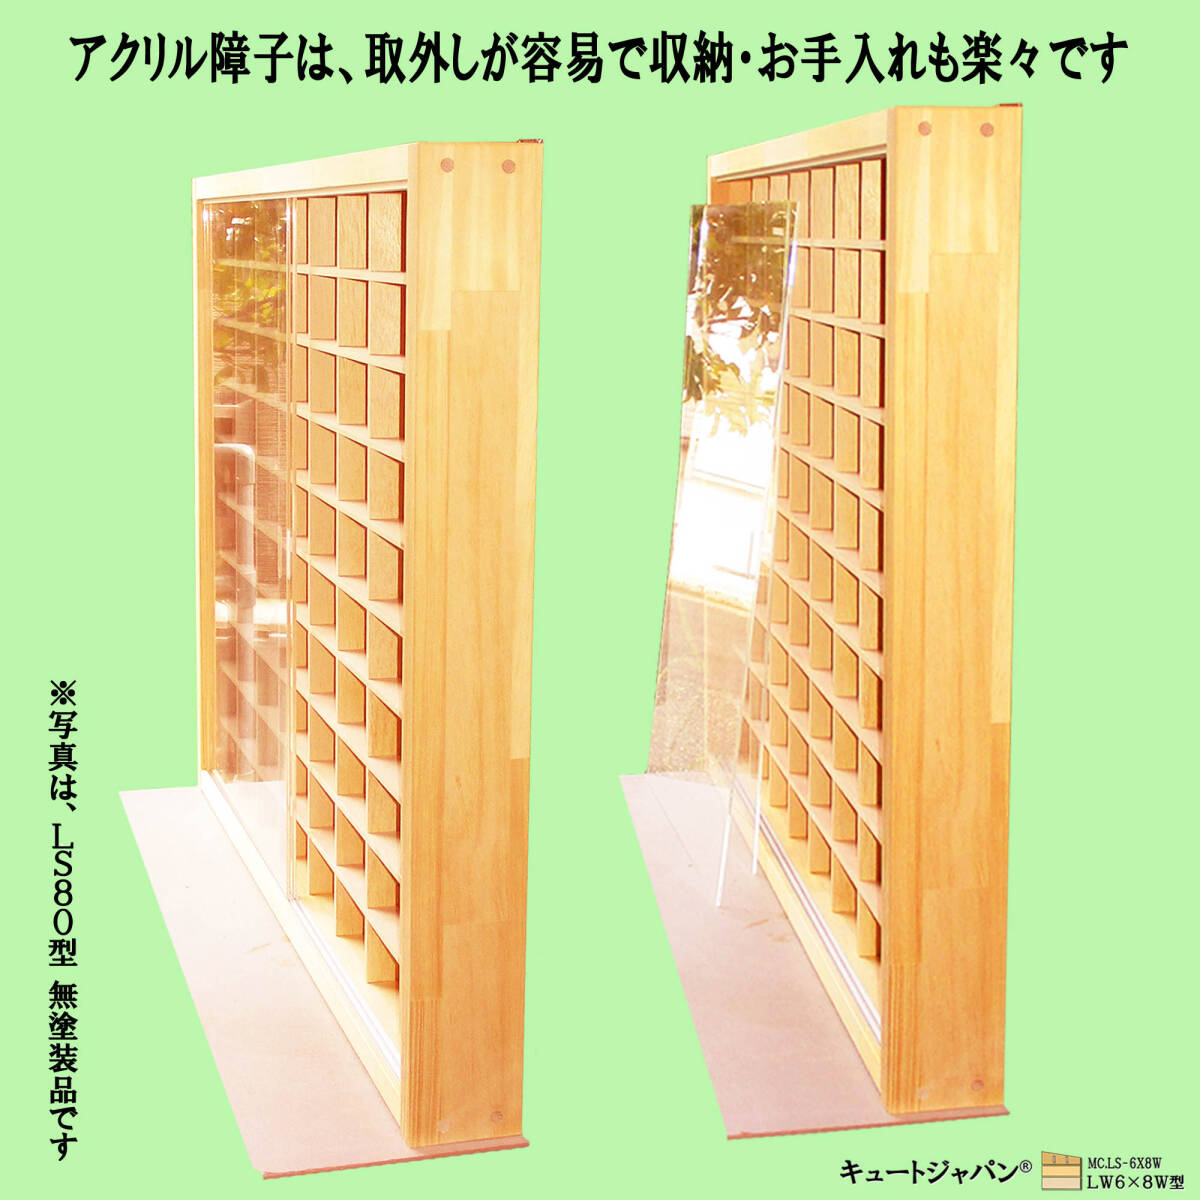 o one-side attaching minicar case Tomica 144 pcs * large size correspondence acrylic fiber shoji attaching maple color painting made in Japan Tomica case [ free shipping ]